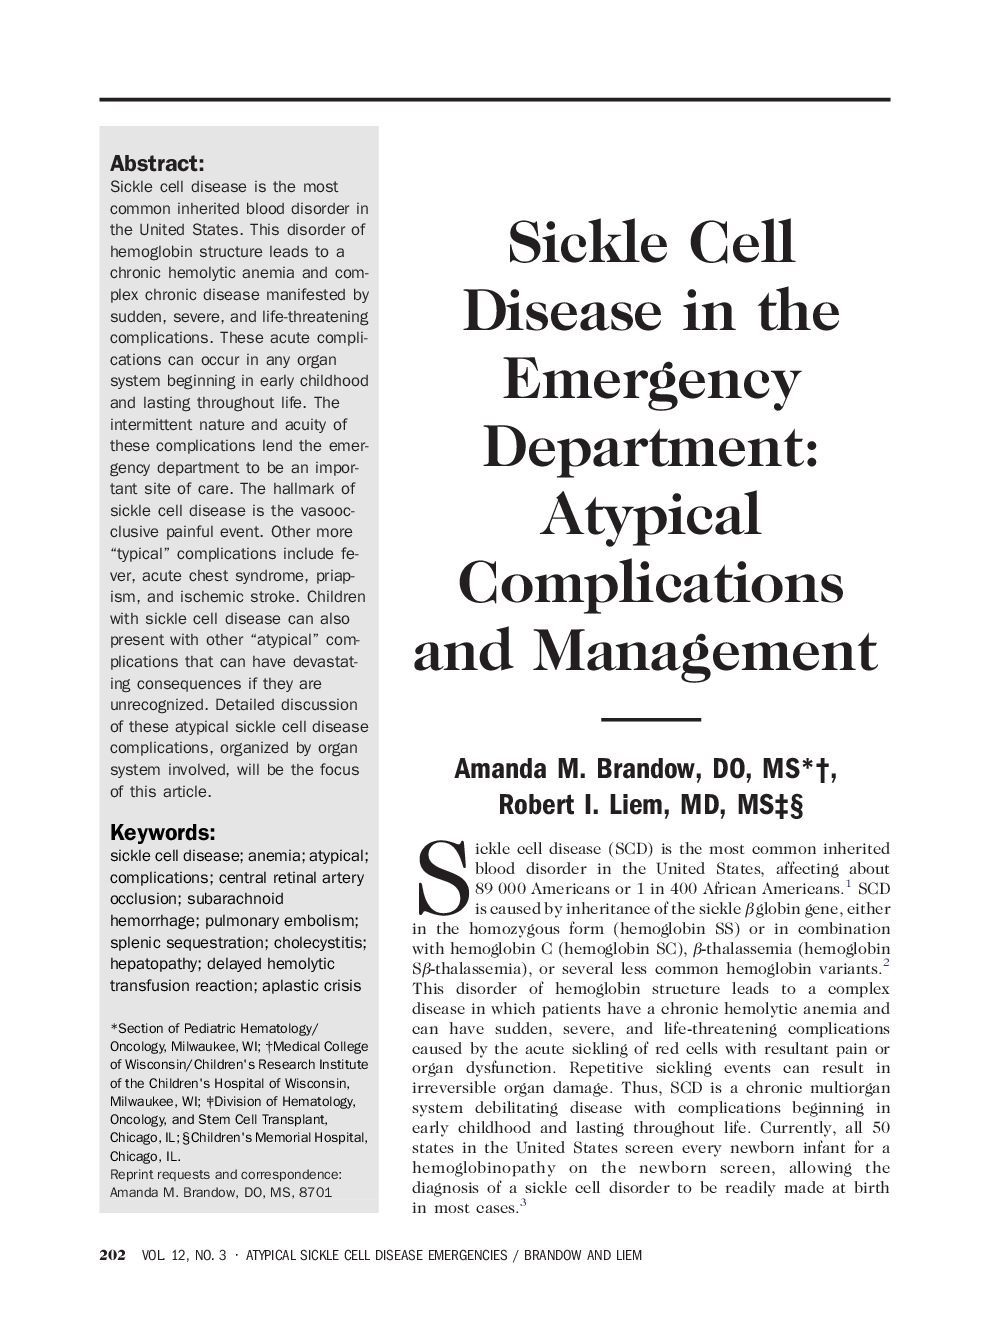 Sickle Cell Disease in the Emergency Department: Atypical Complications and Management 